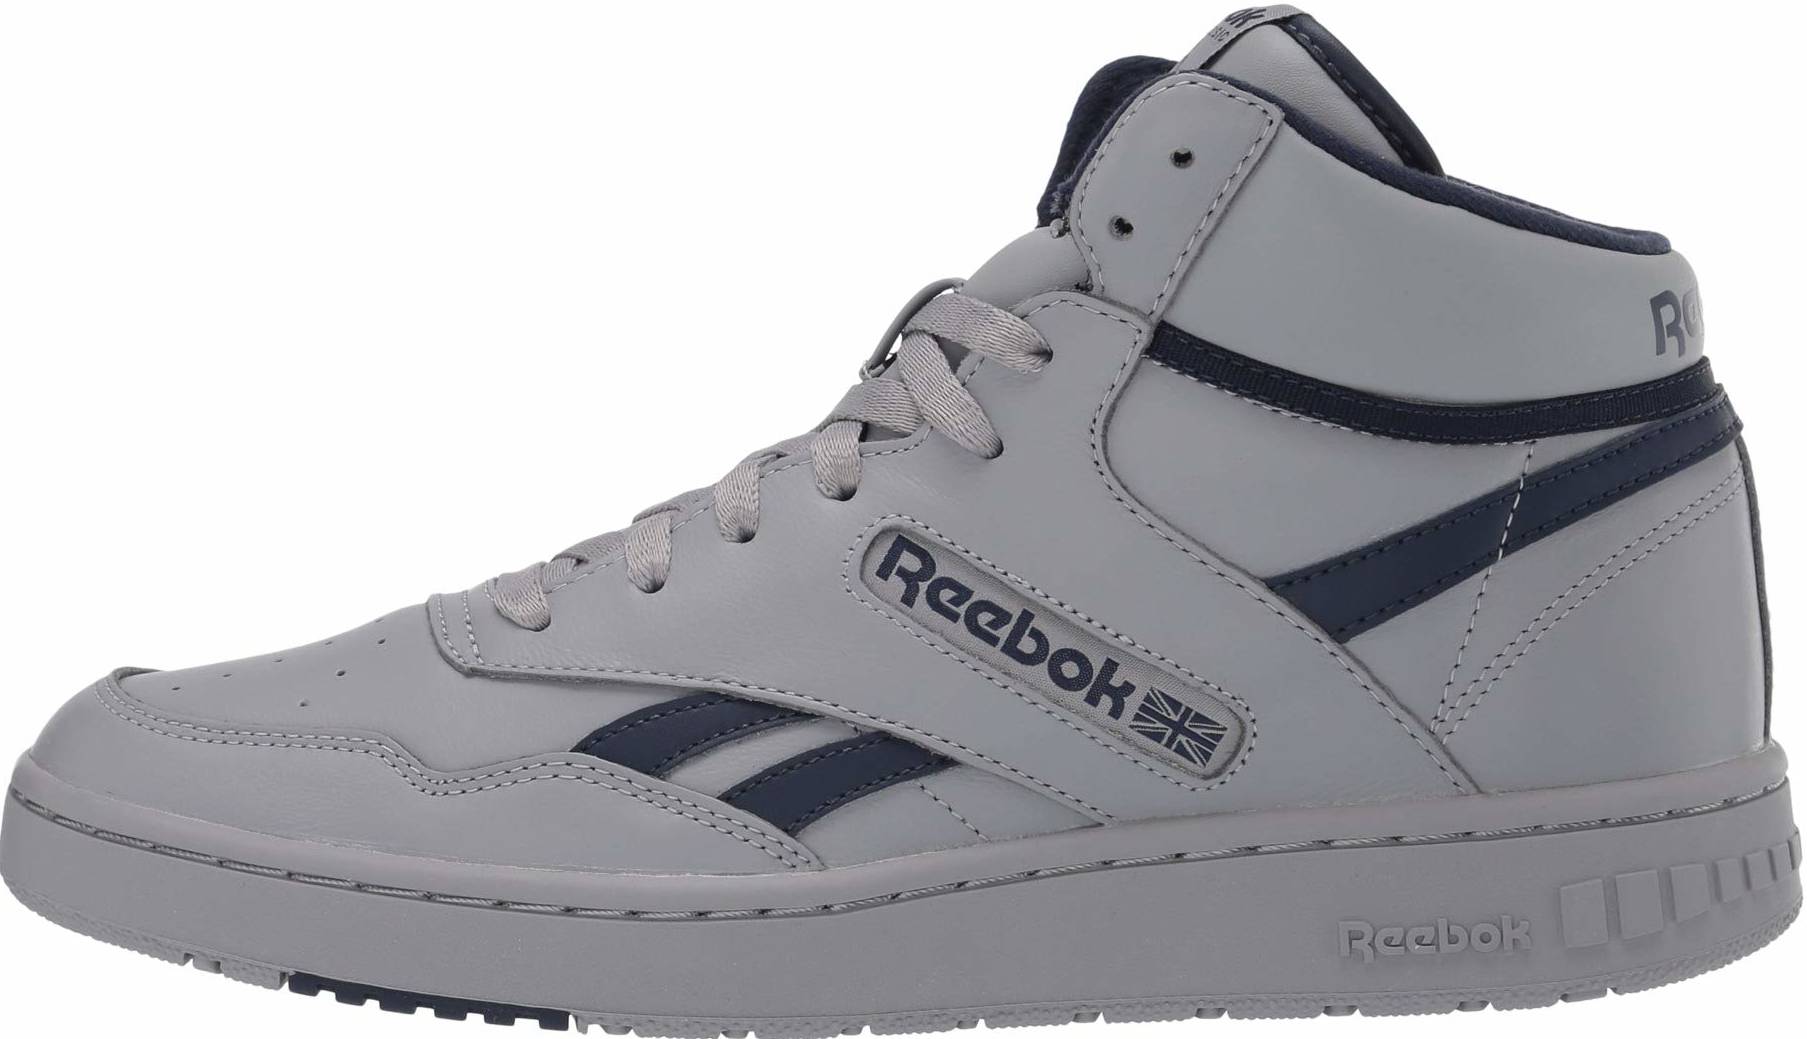 Only $80 + Review of Reebok BB 4600 